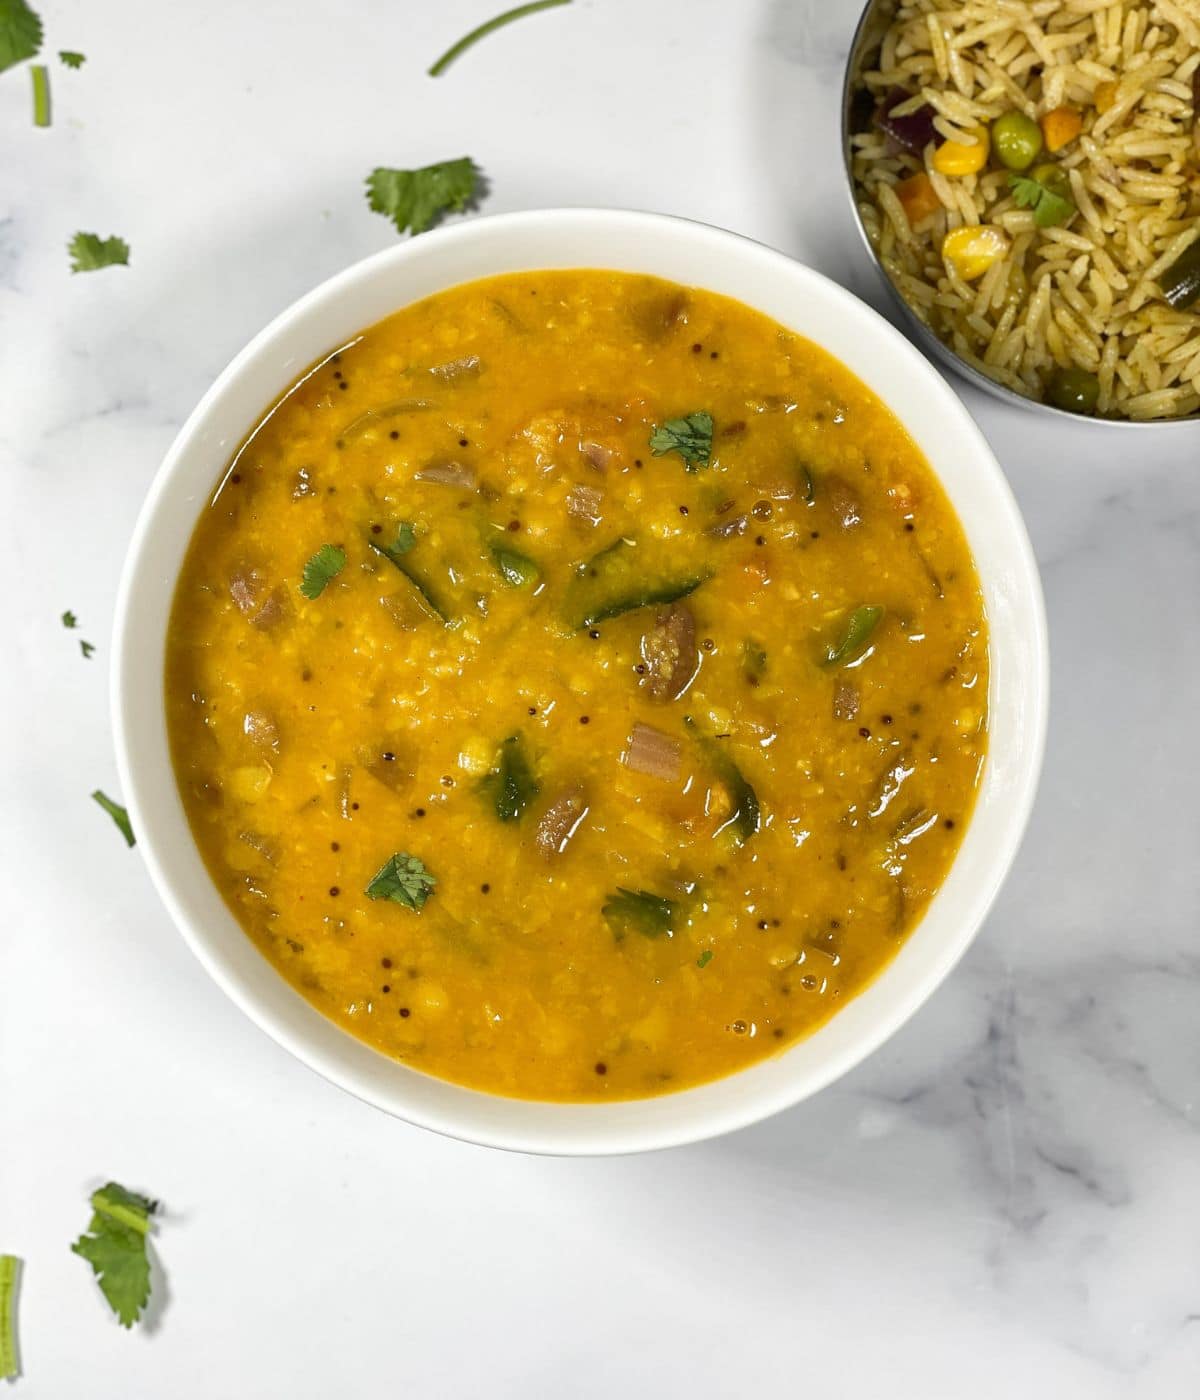 A bowl of gujarati dal is on the table.